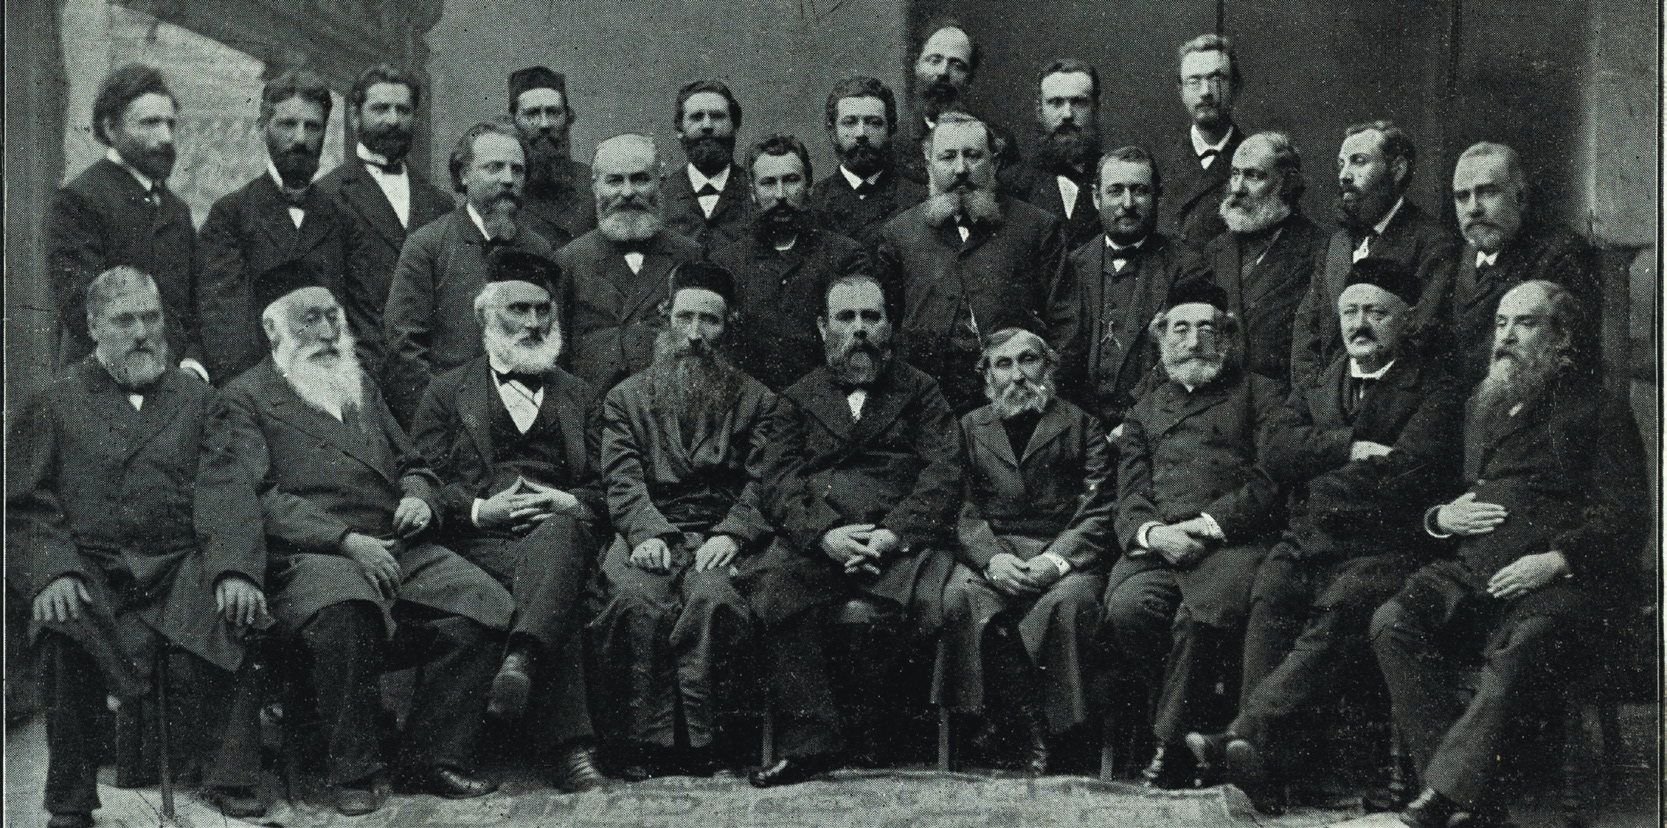 Delegates at the Katowice Conference were ahead of their time. The proportion of bearded and skullcap-wearing delegates far exceeded that at later Zionist congresses, a sign of the secularization of the Zionist movement